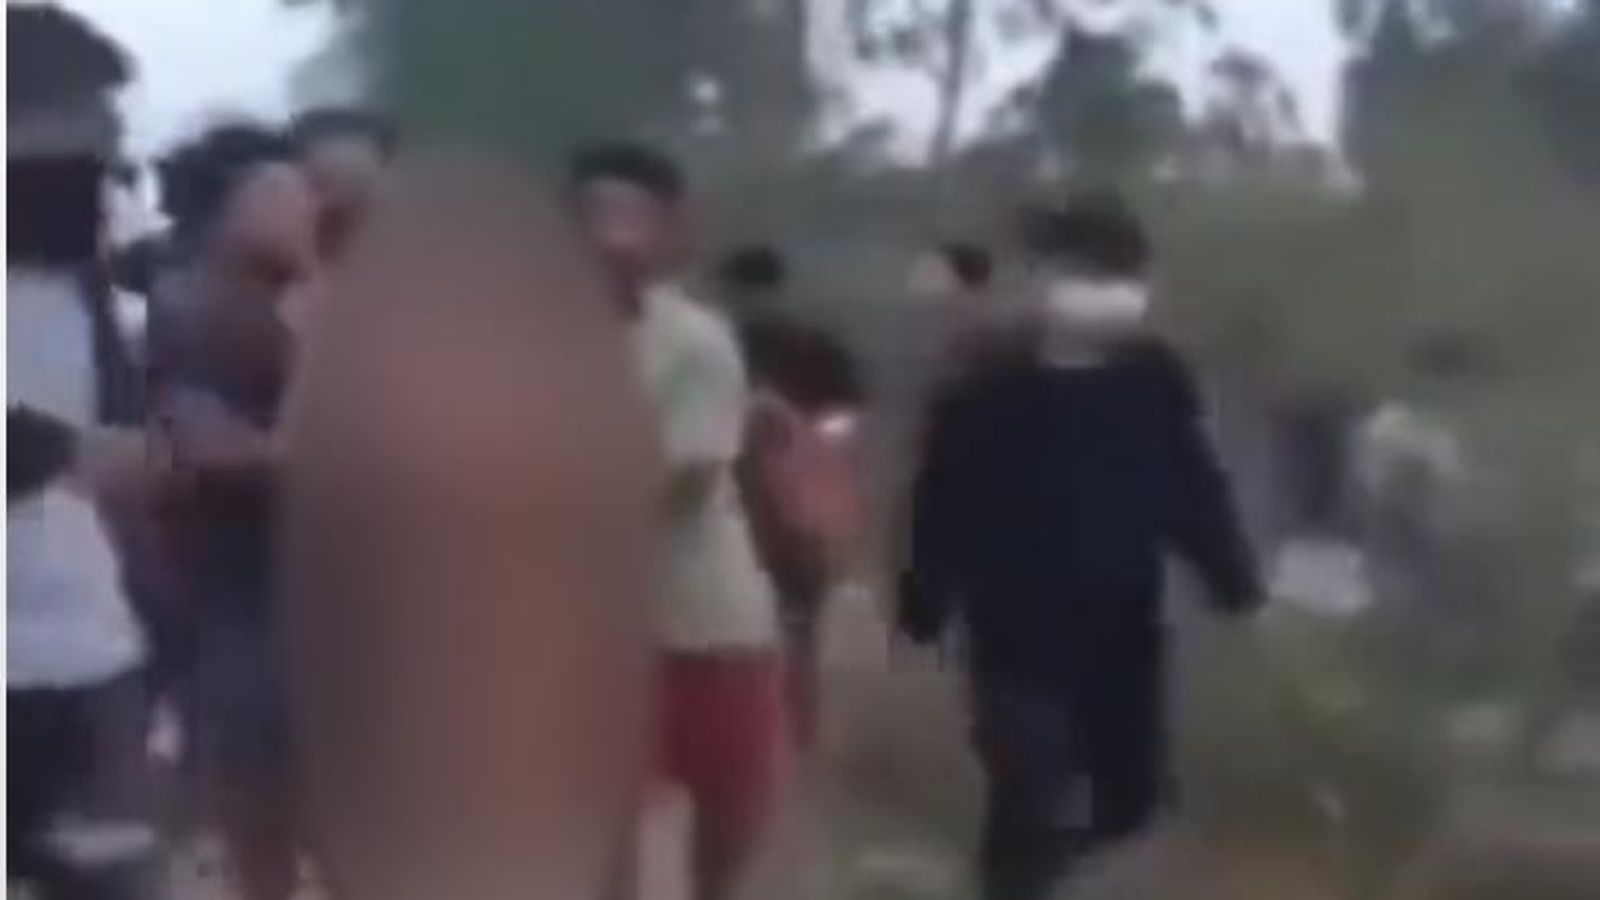 Xxx Hdvideos Raps Sex - Gang rape investigated as video shows abducted Indian women being paraded  naked in Manipur | World News | Sky News